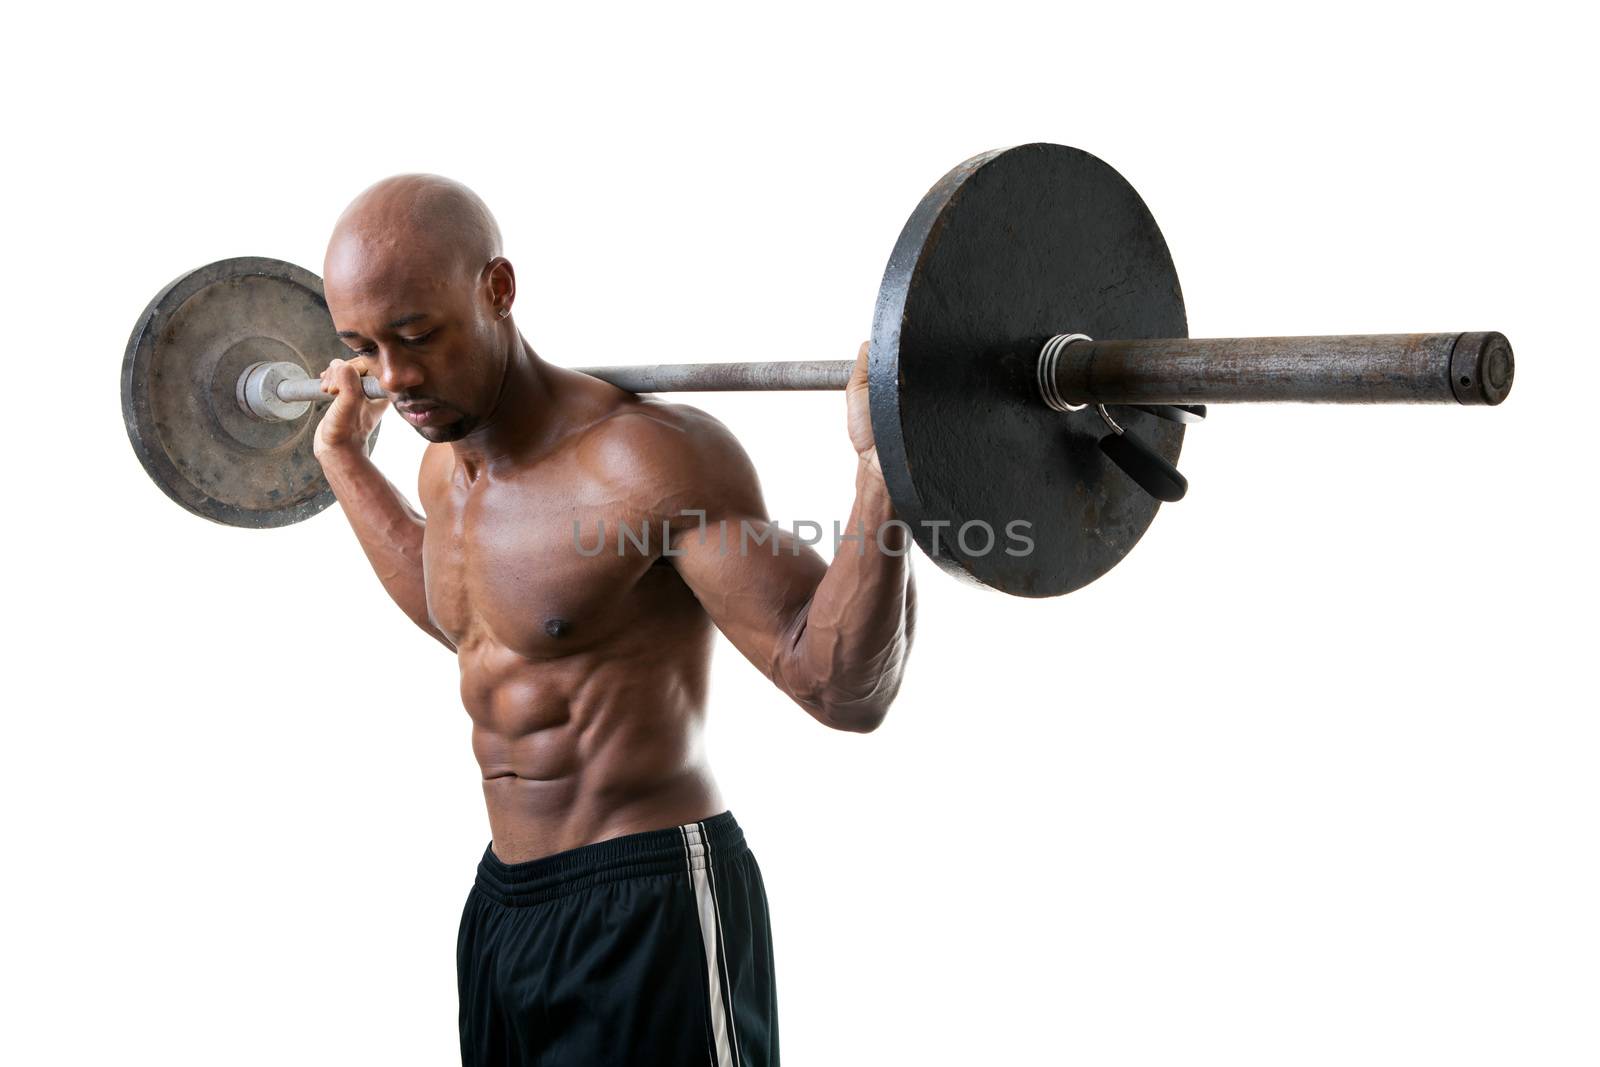 Toned and ripped lean muscle fitness man lifting weights isolated over a white background.